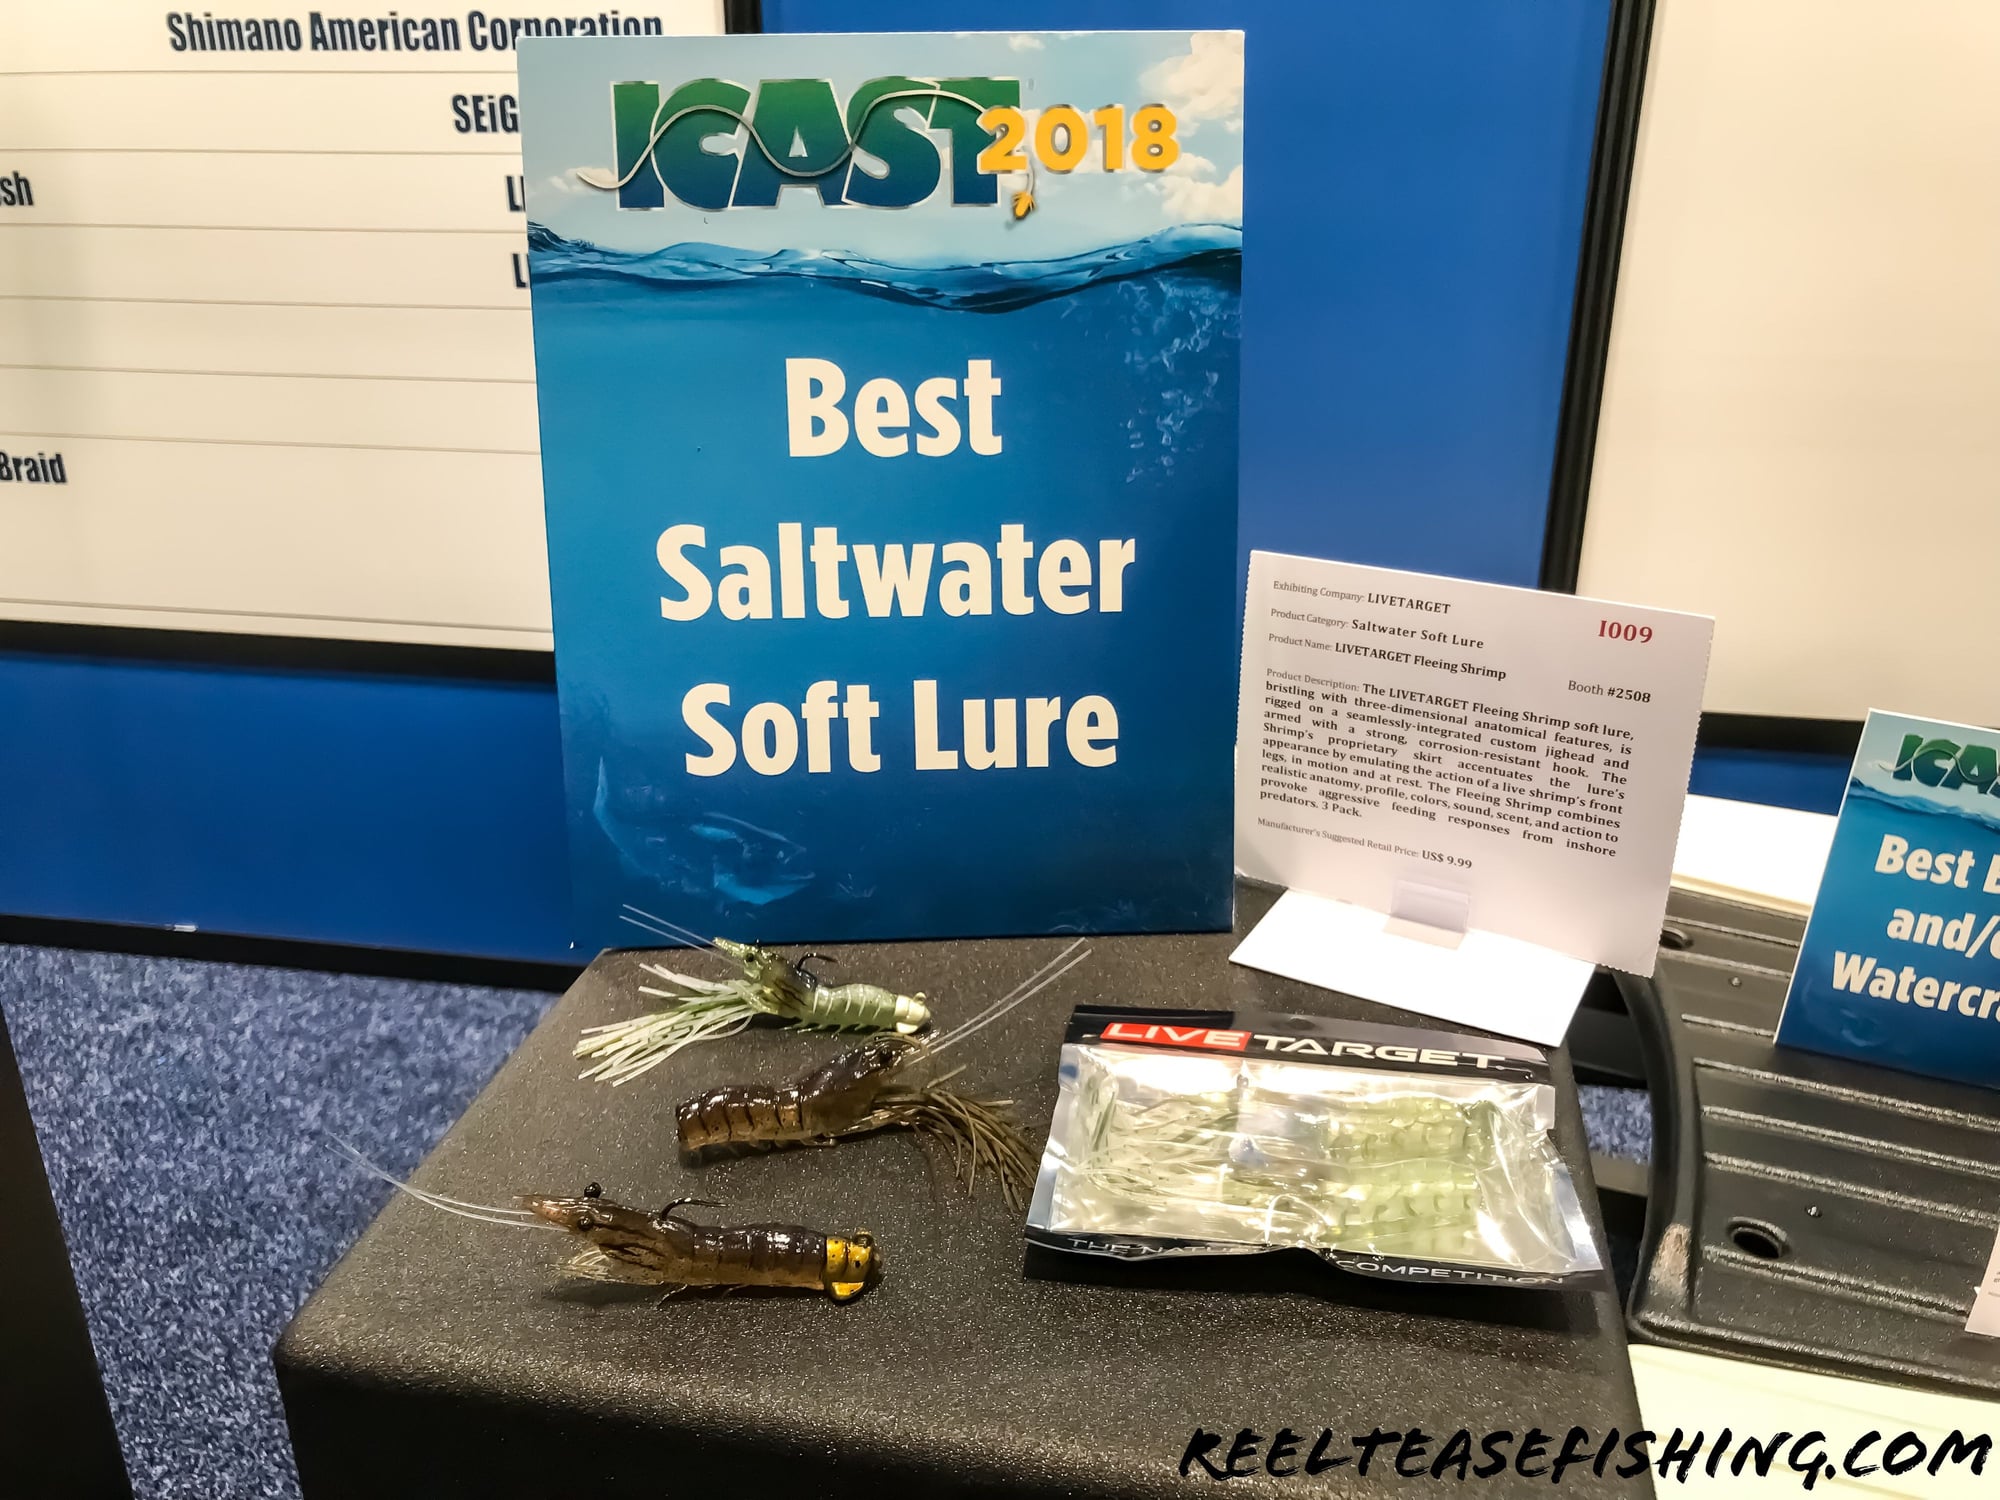 ICAST 2018, what do you want to see? - Page 3 - The Hull Truth